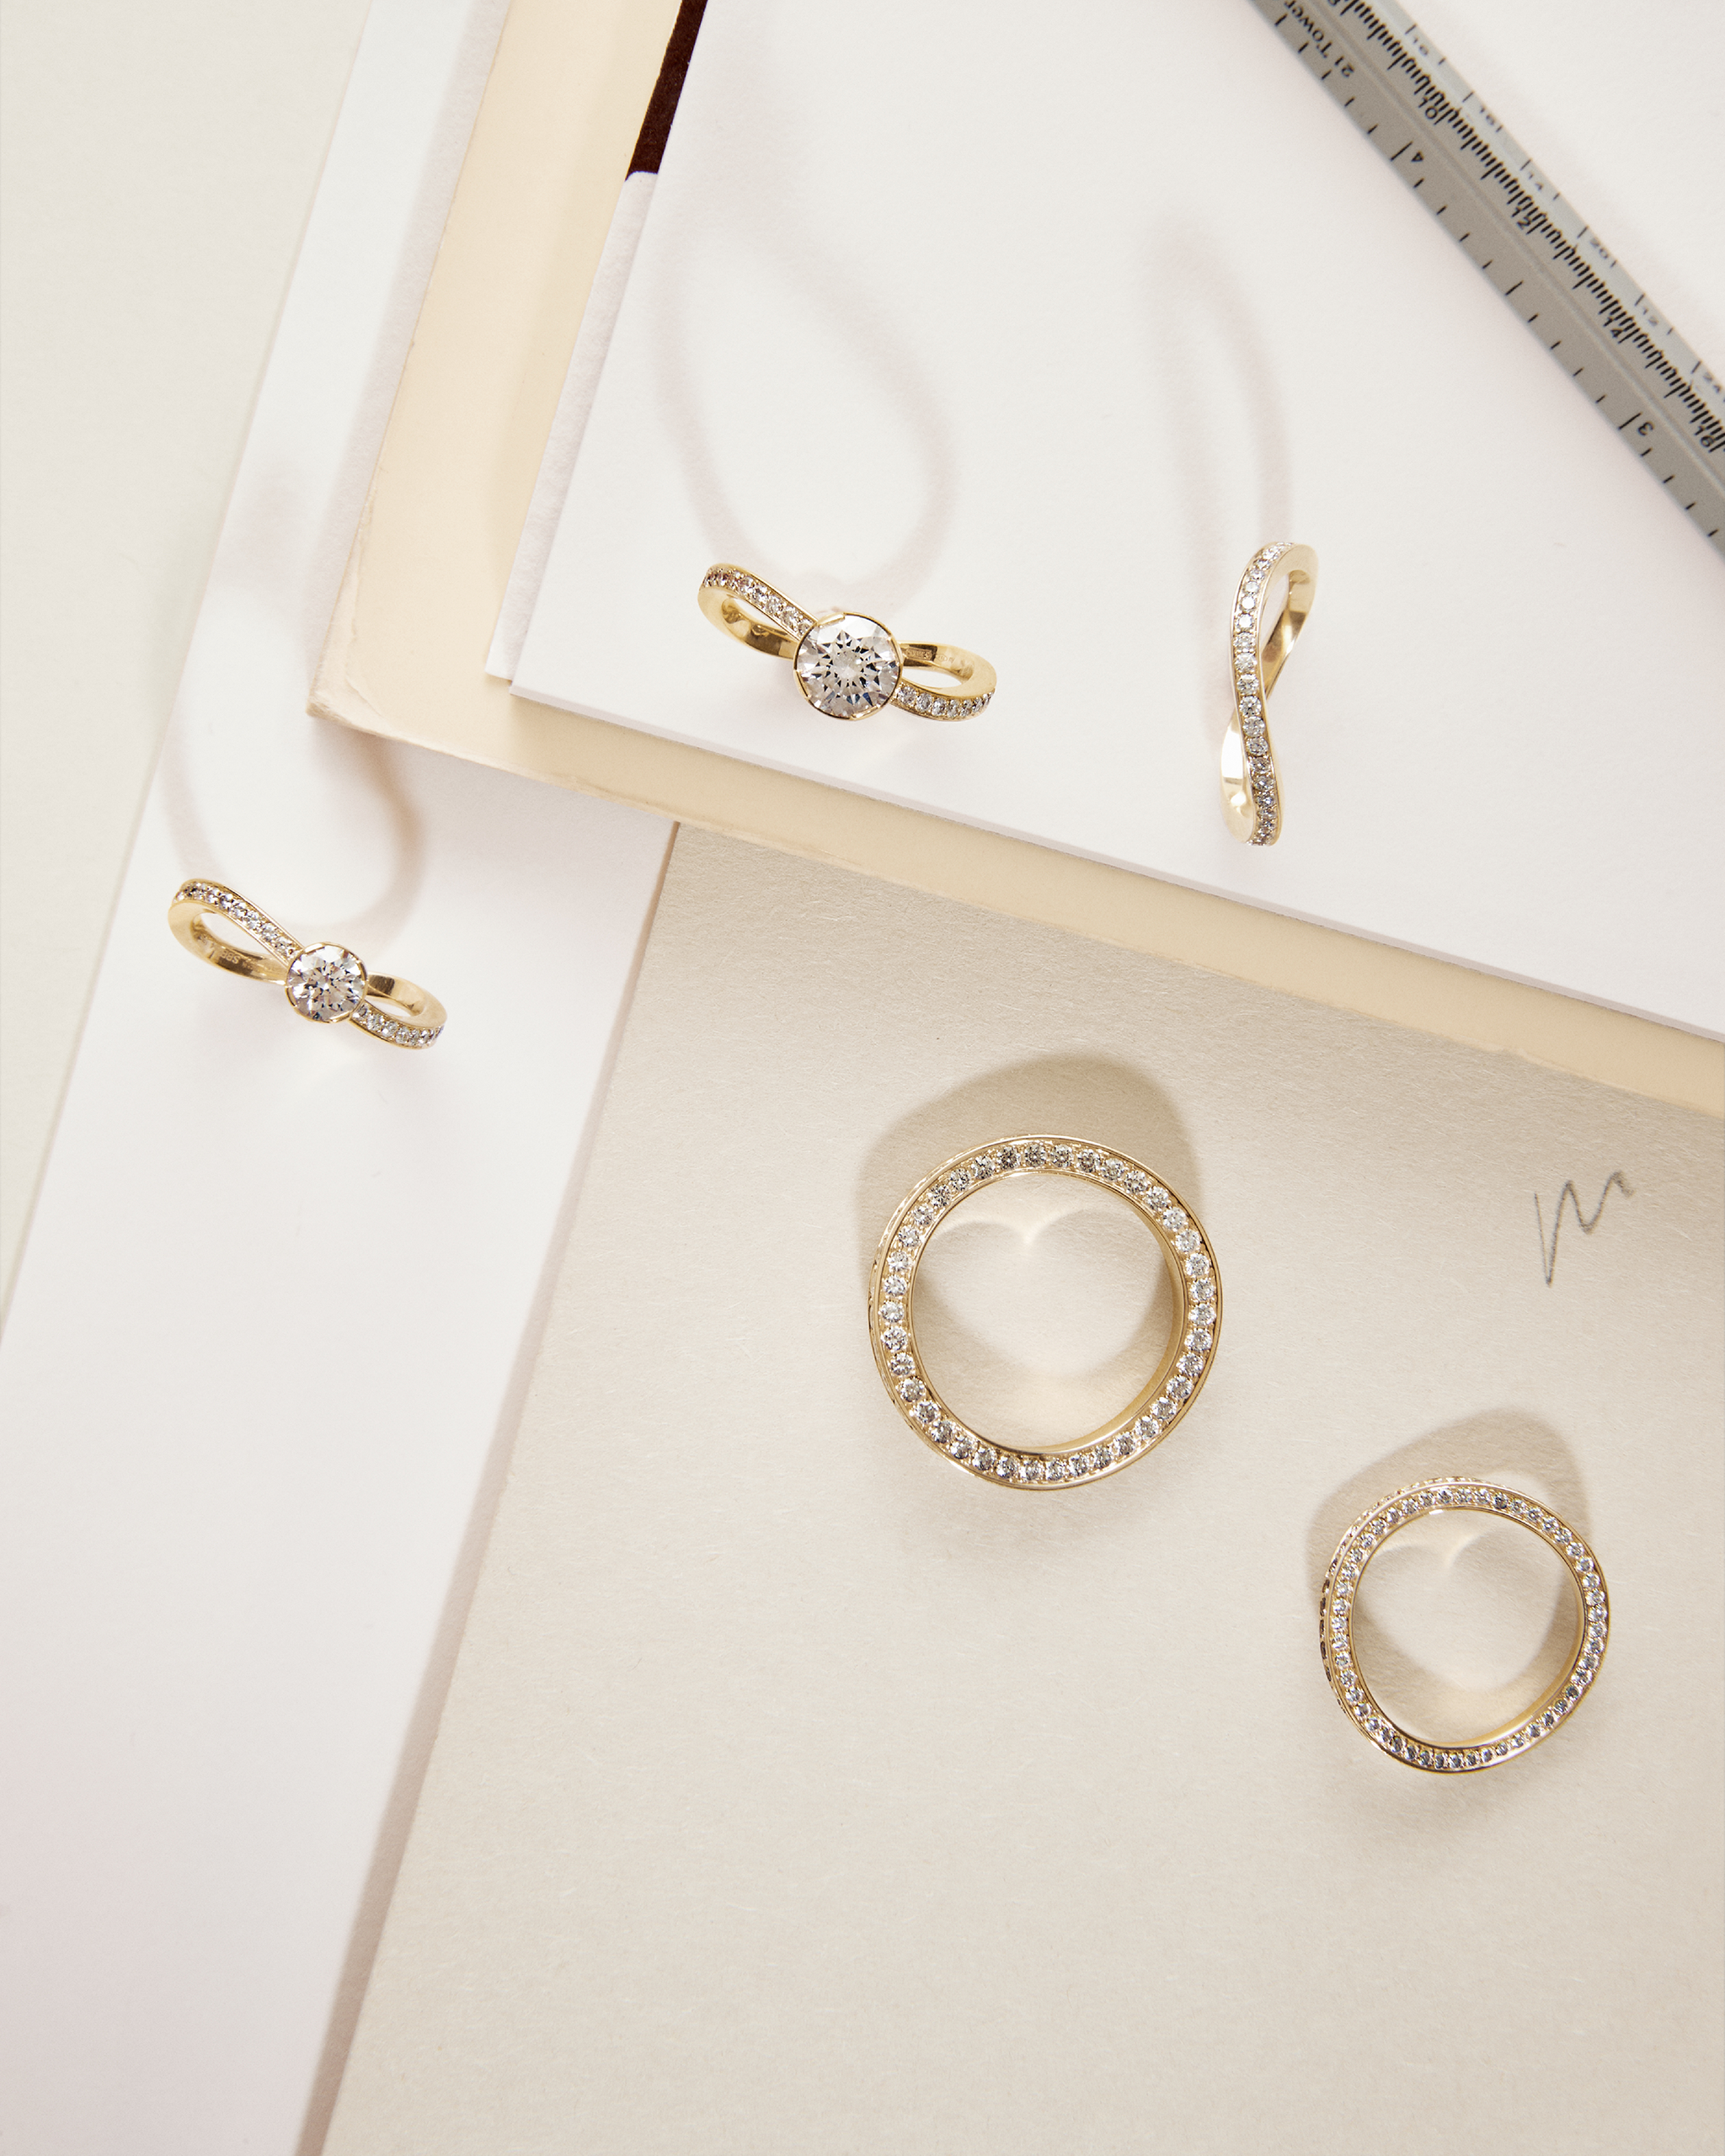 Selection of engagement rings and wedding bands, all handmade in 18K recycled gold.